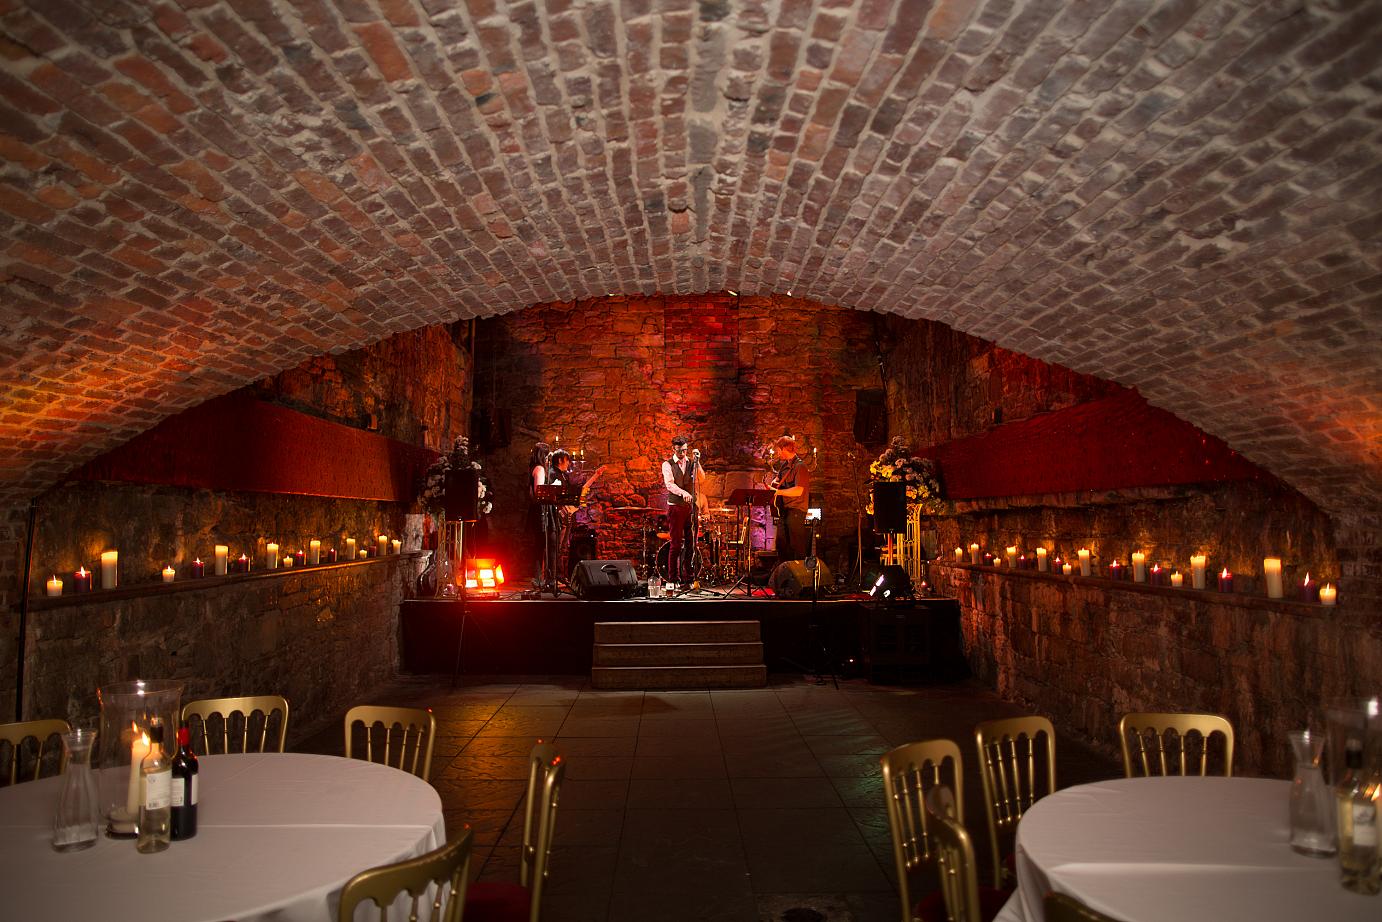 Live music sessions become even more special in dimly lit catacombs.